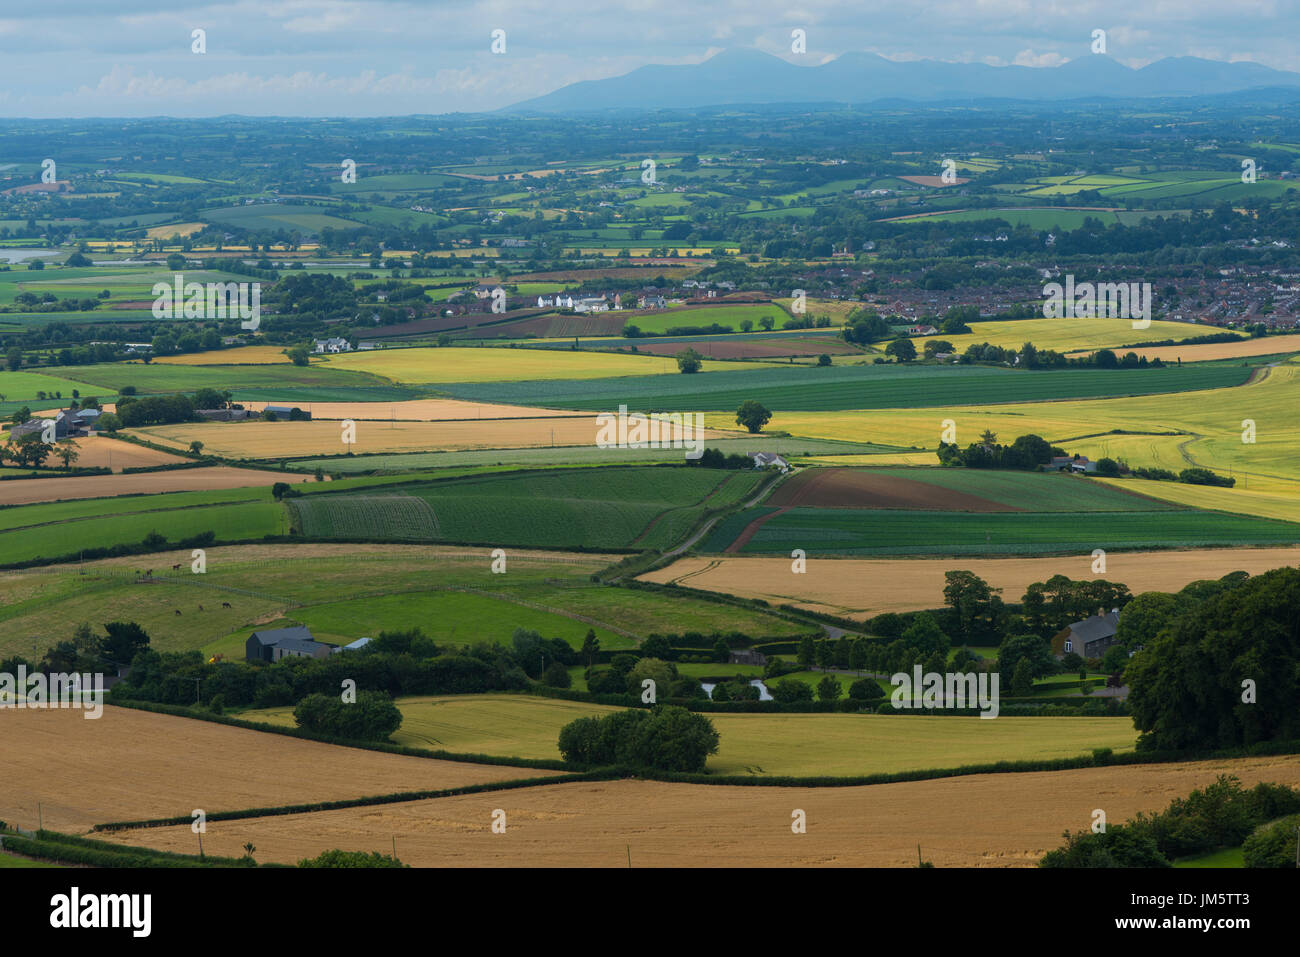 The rolling, green countryside of the Ards Peninsula as views from the top of Scrabo Tower, Newtownards in July 2017. Stock Photo